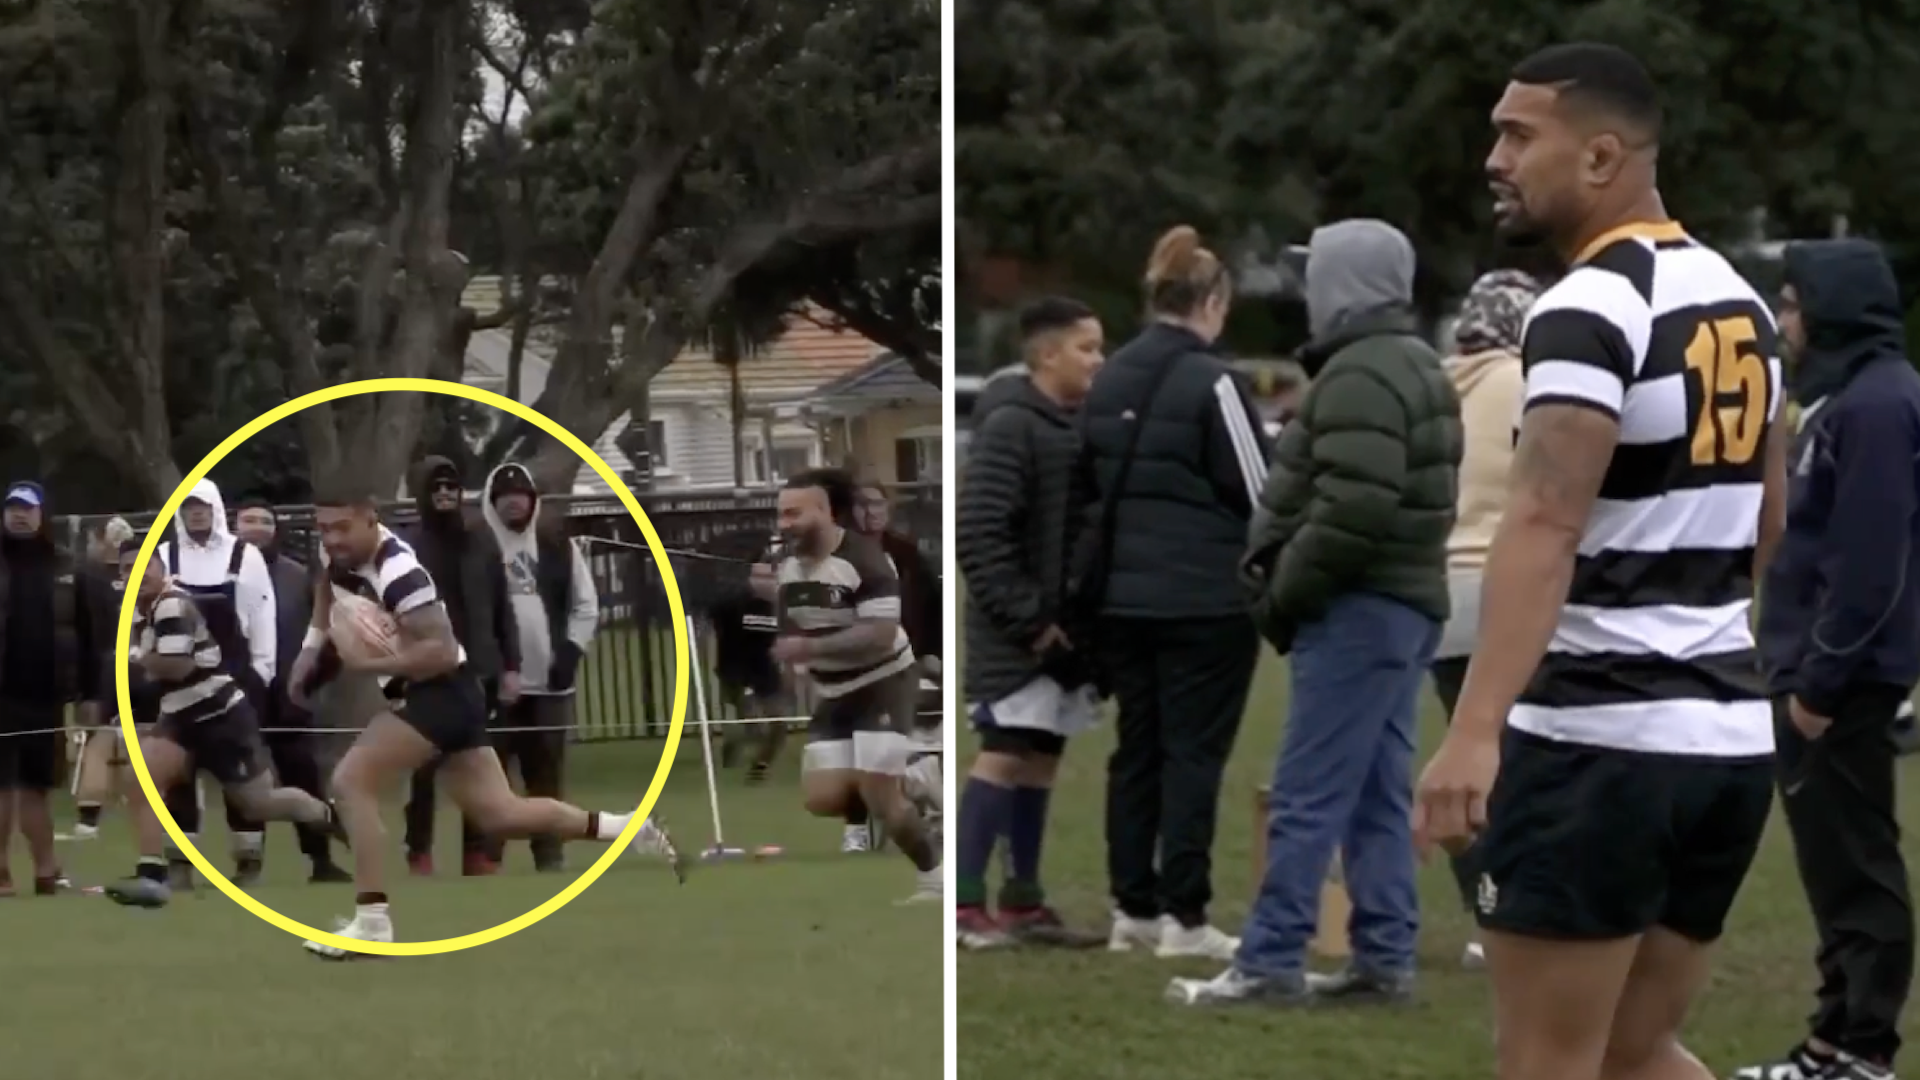 Ardie Savea grassroots try overshadowed by wild fight in background